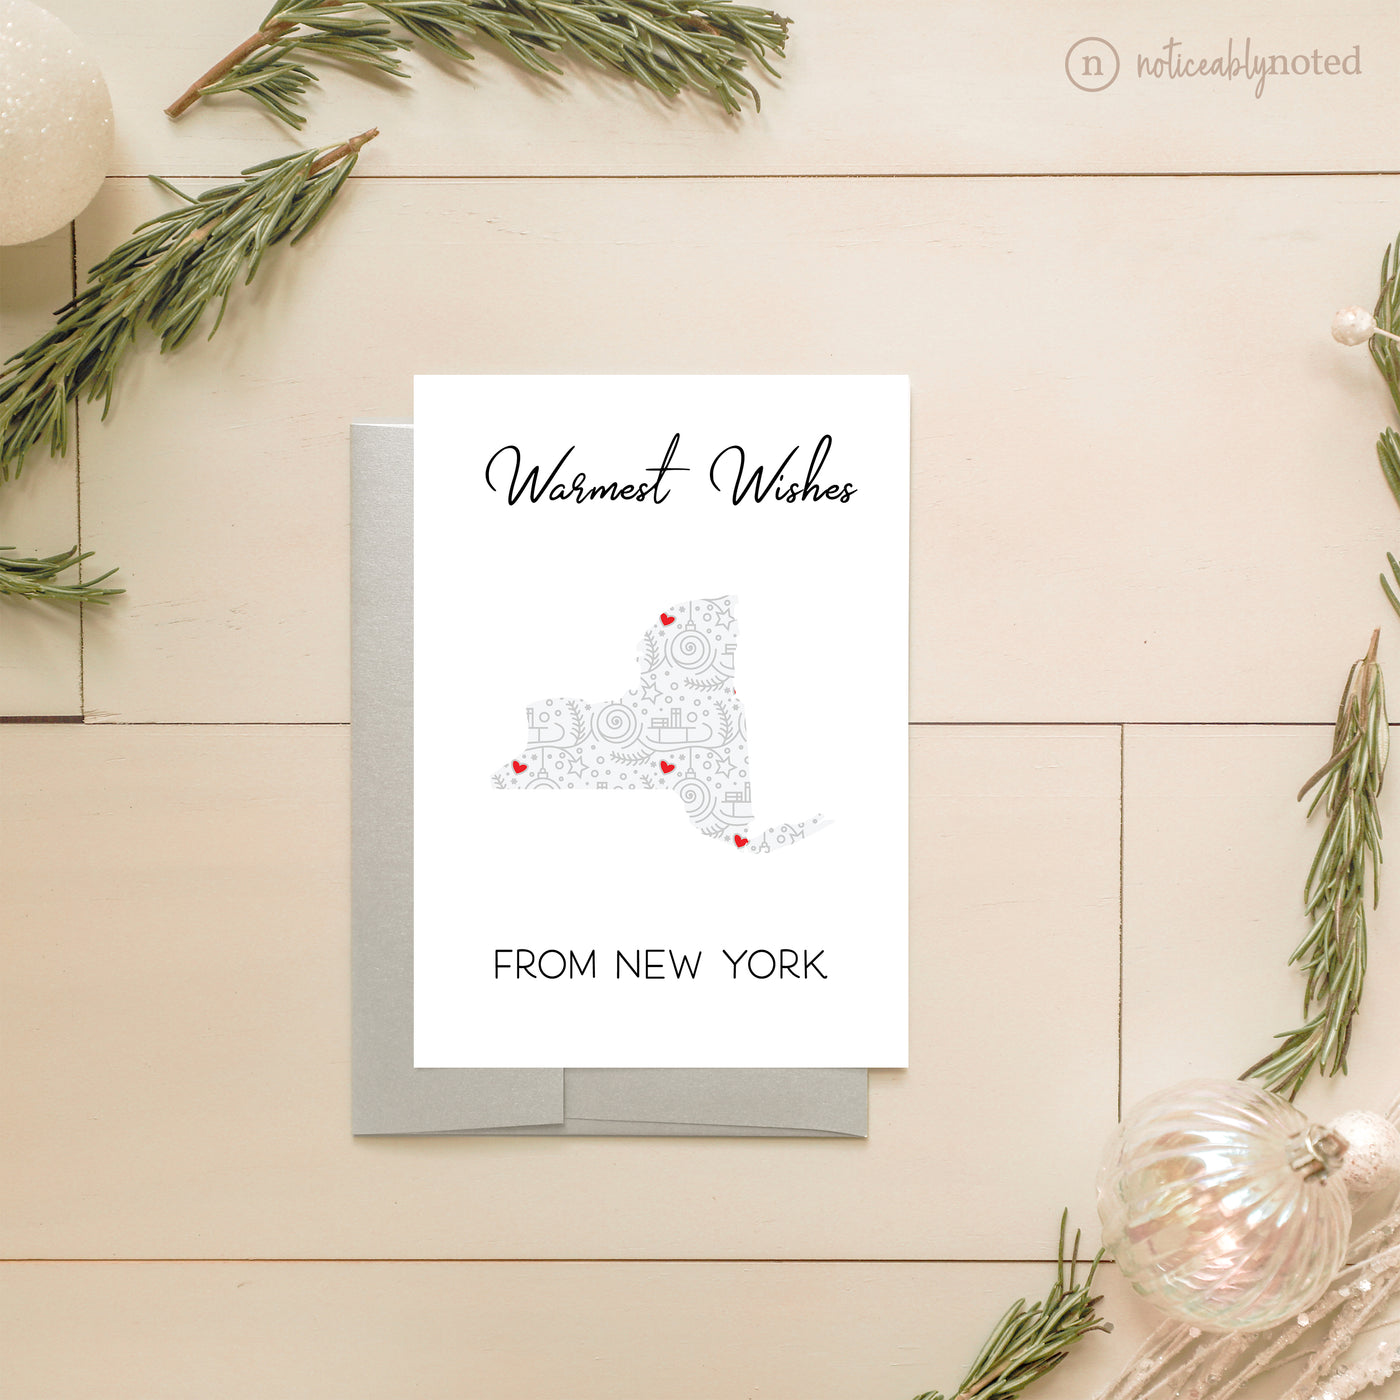 NY Holiday Greeting Cards | Noticeably Noted